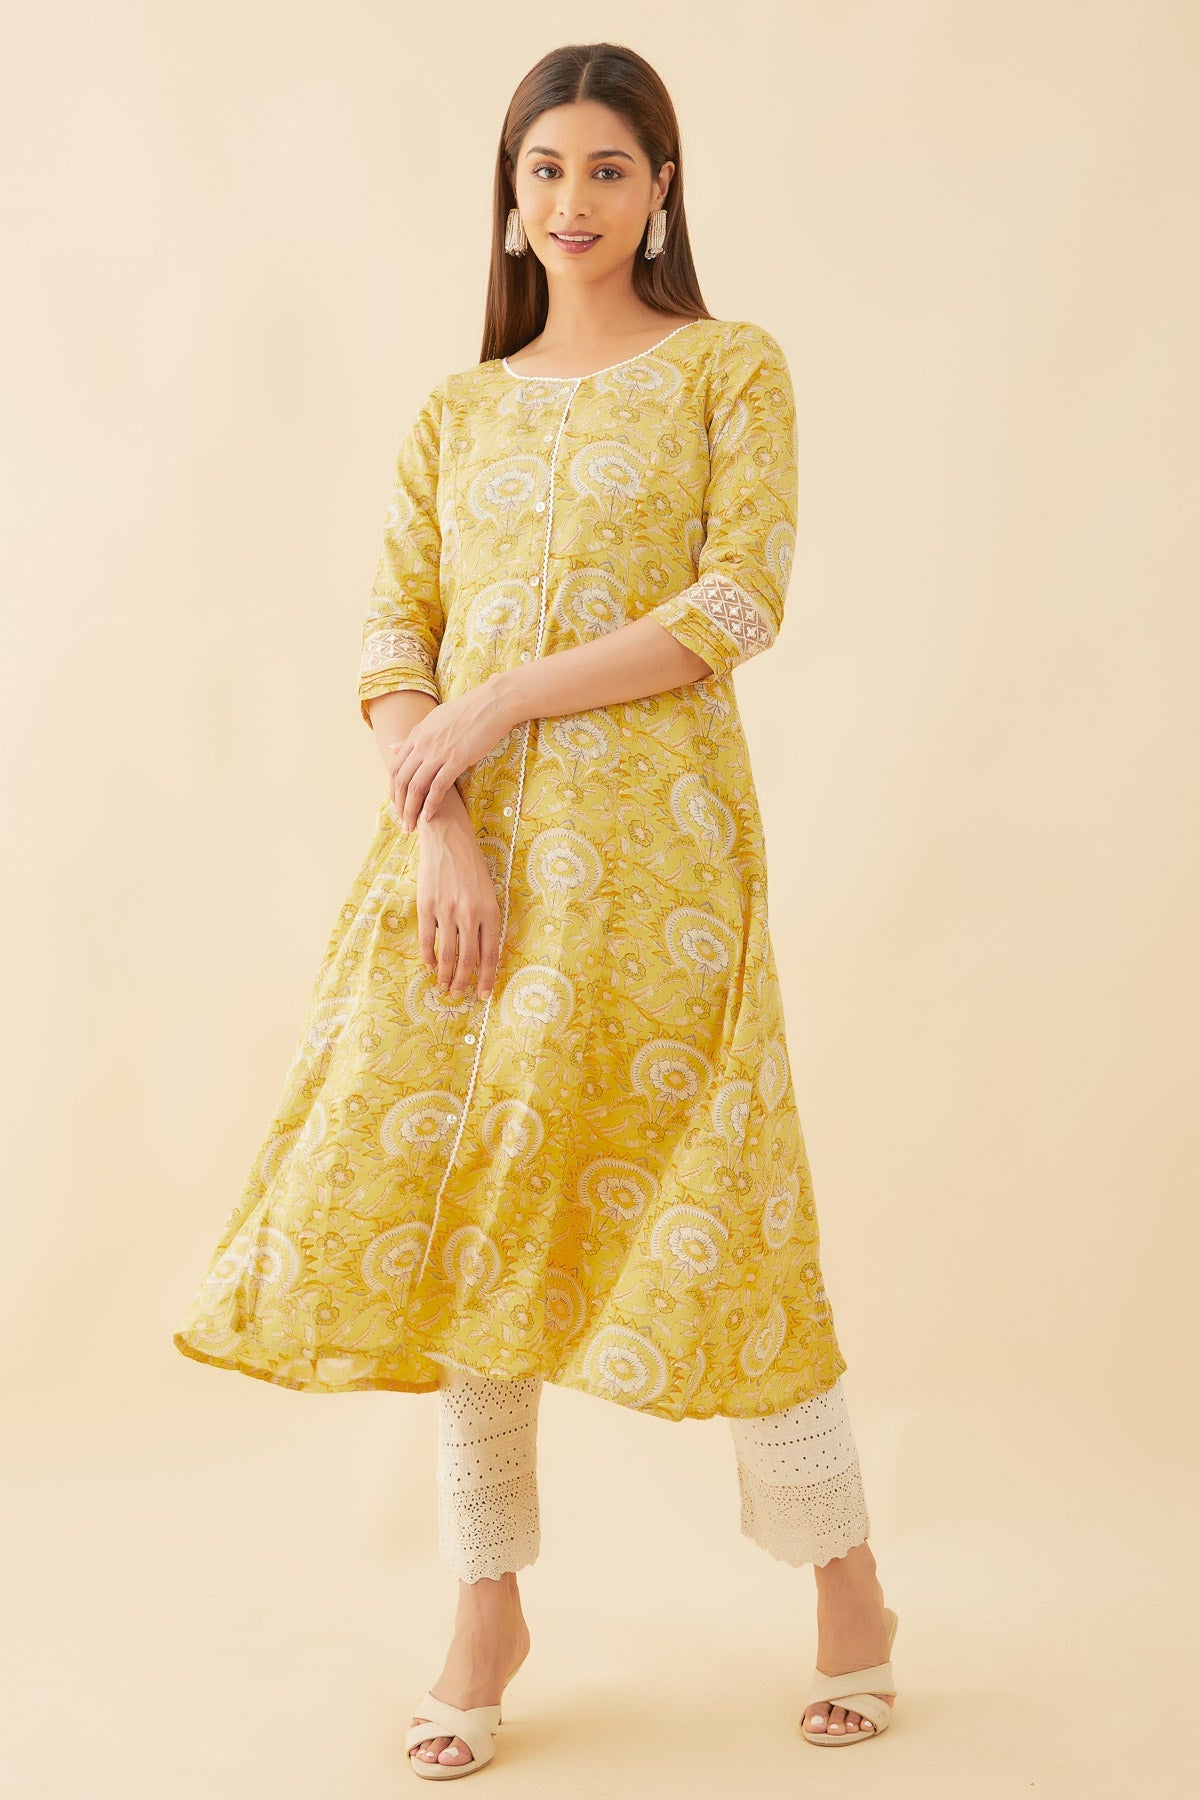 All Over Floral Print WIth Crochet Detail Kurta - Yellow